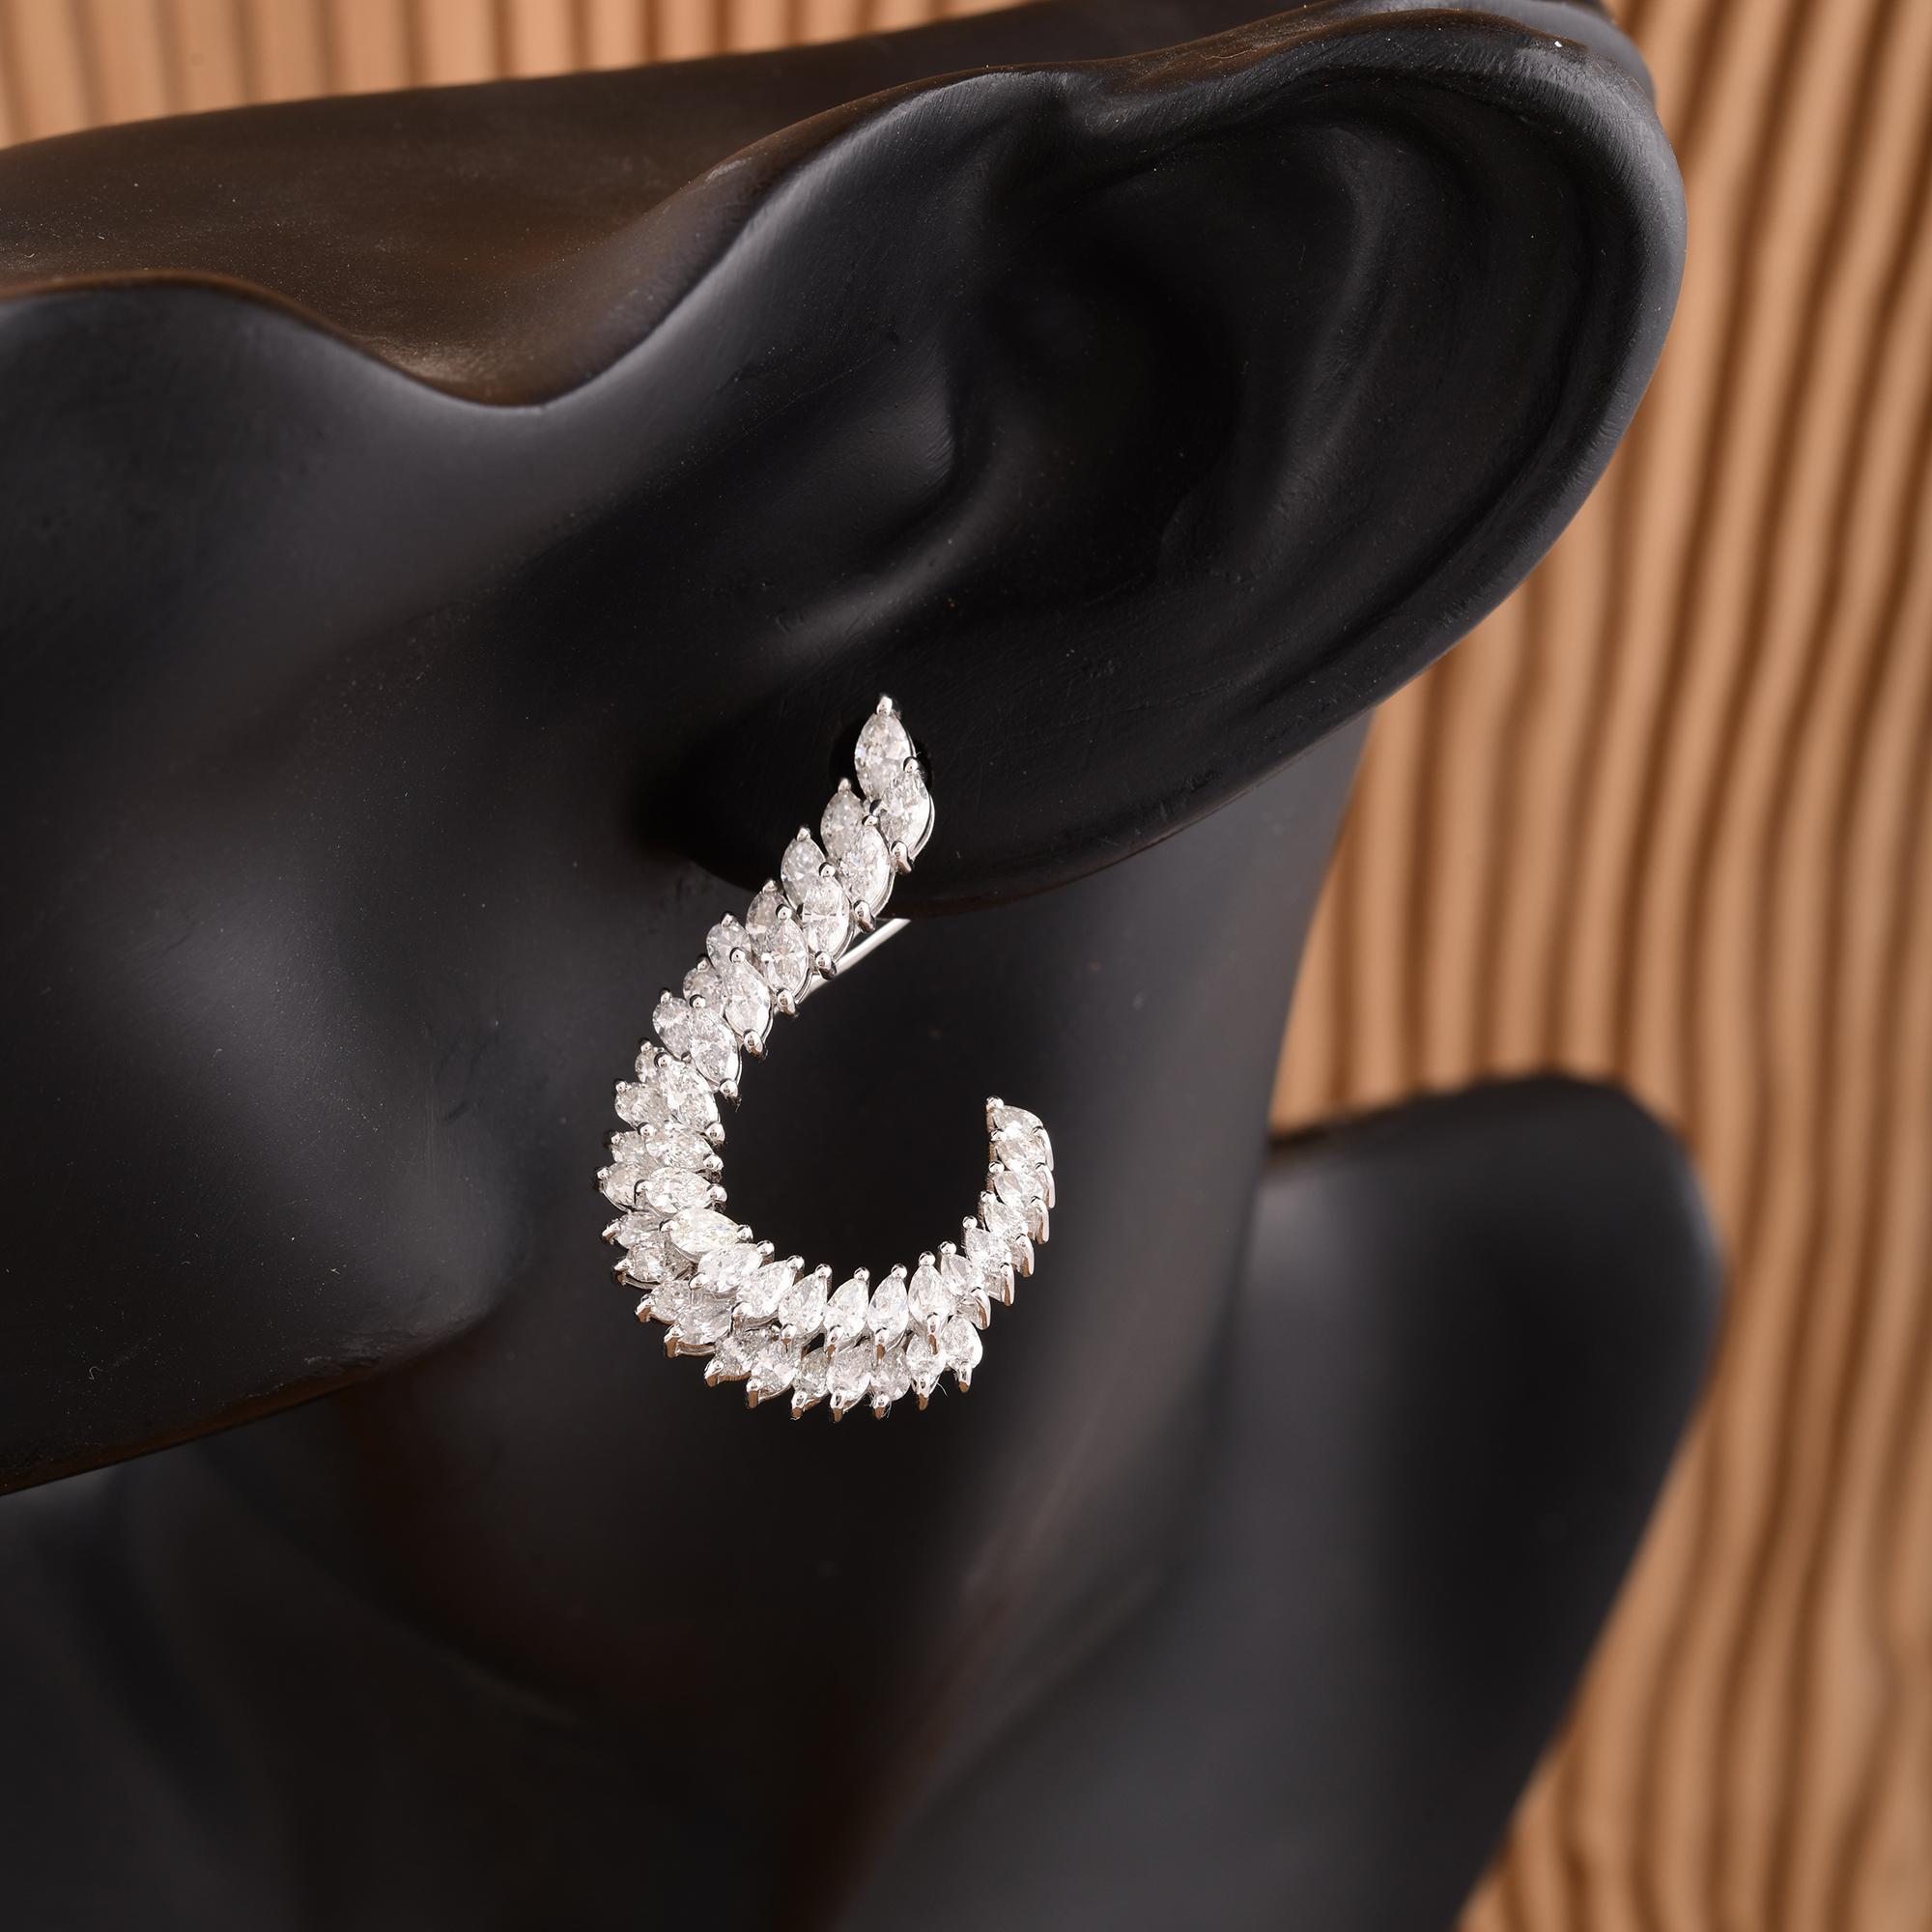 Each earring features a dazzling pear-cut diamond, renowned for its distinctive teardrop shape that exudes grace and refinement. The diamonds boast exceptional clarity, ensuring a mesmerizing sparkle that captures the eye with every movement.